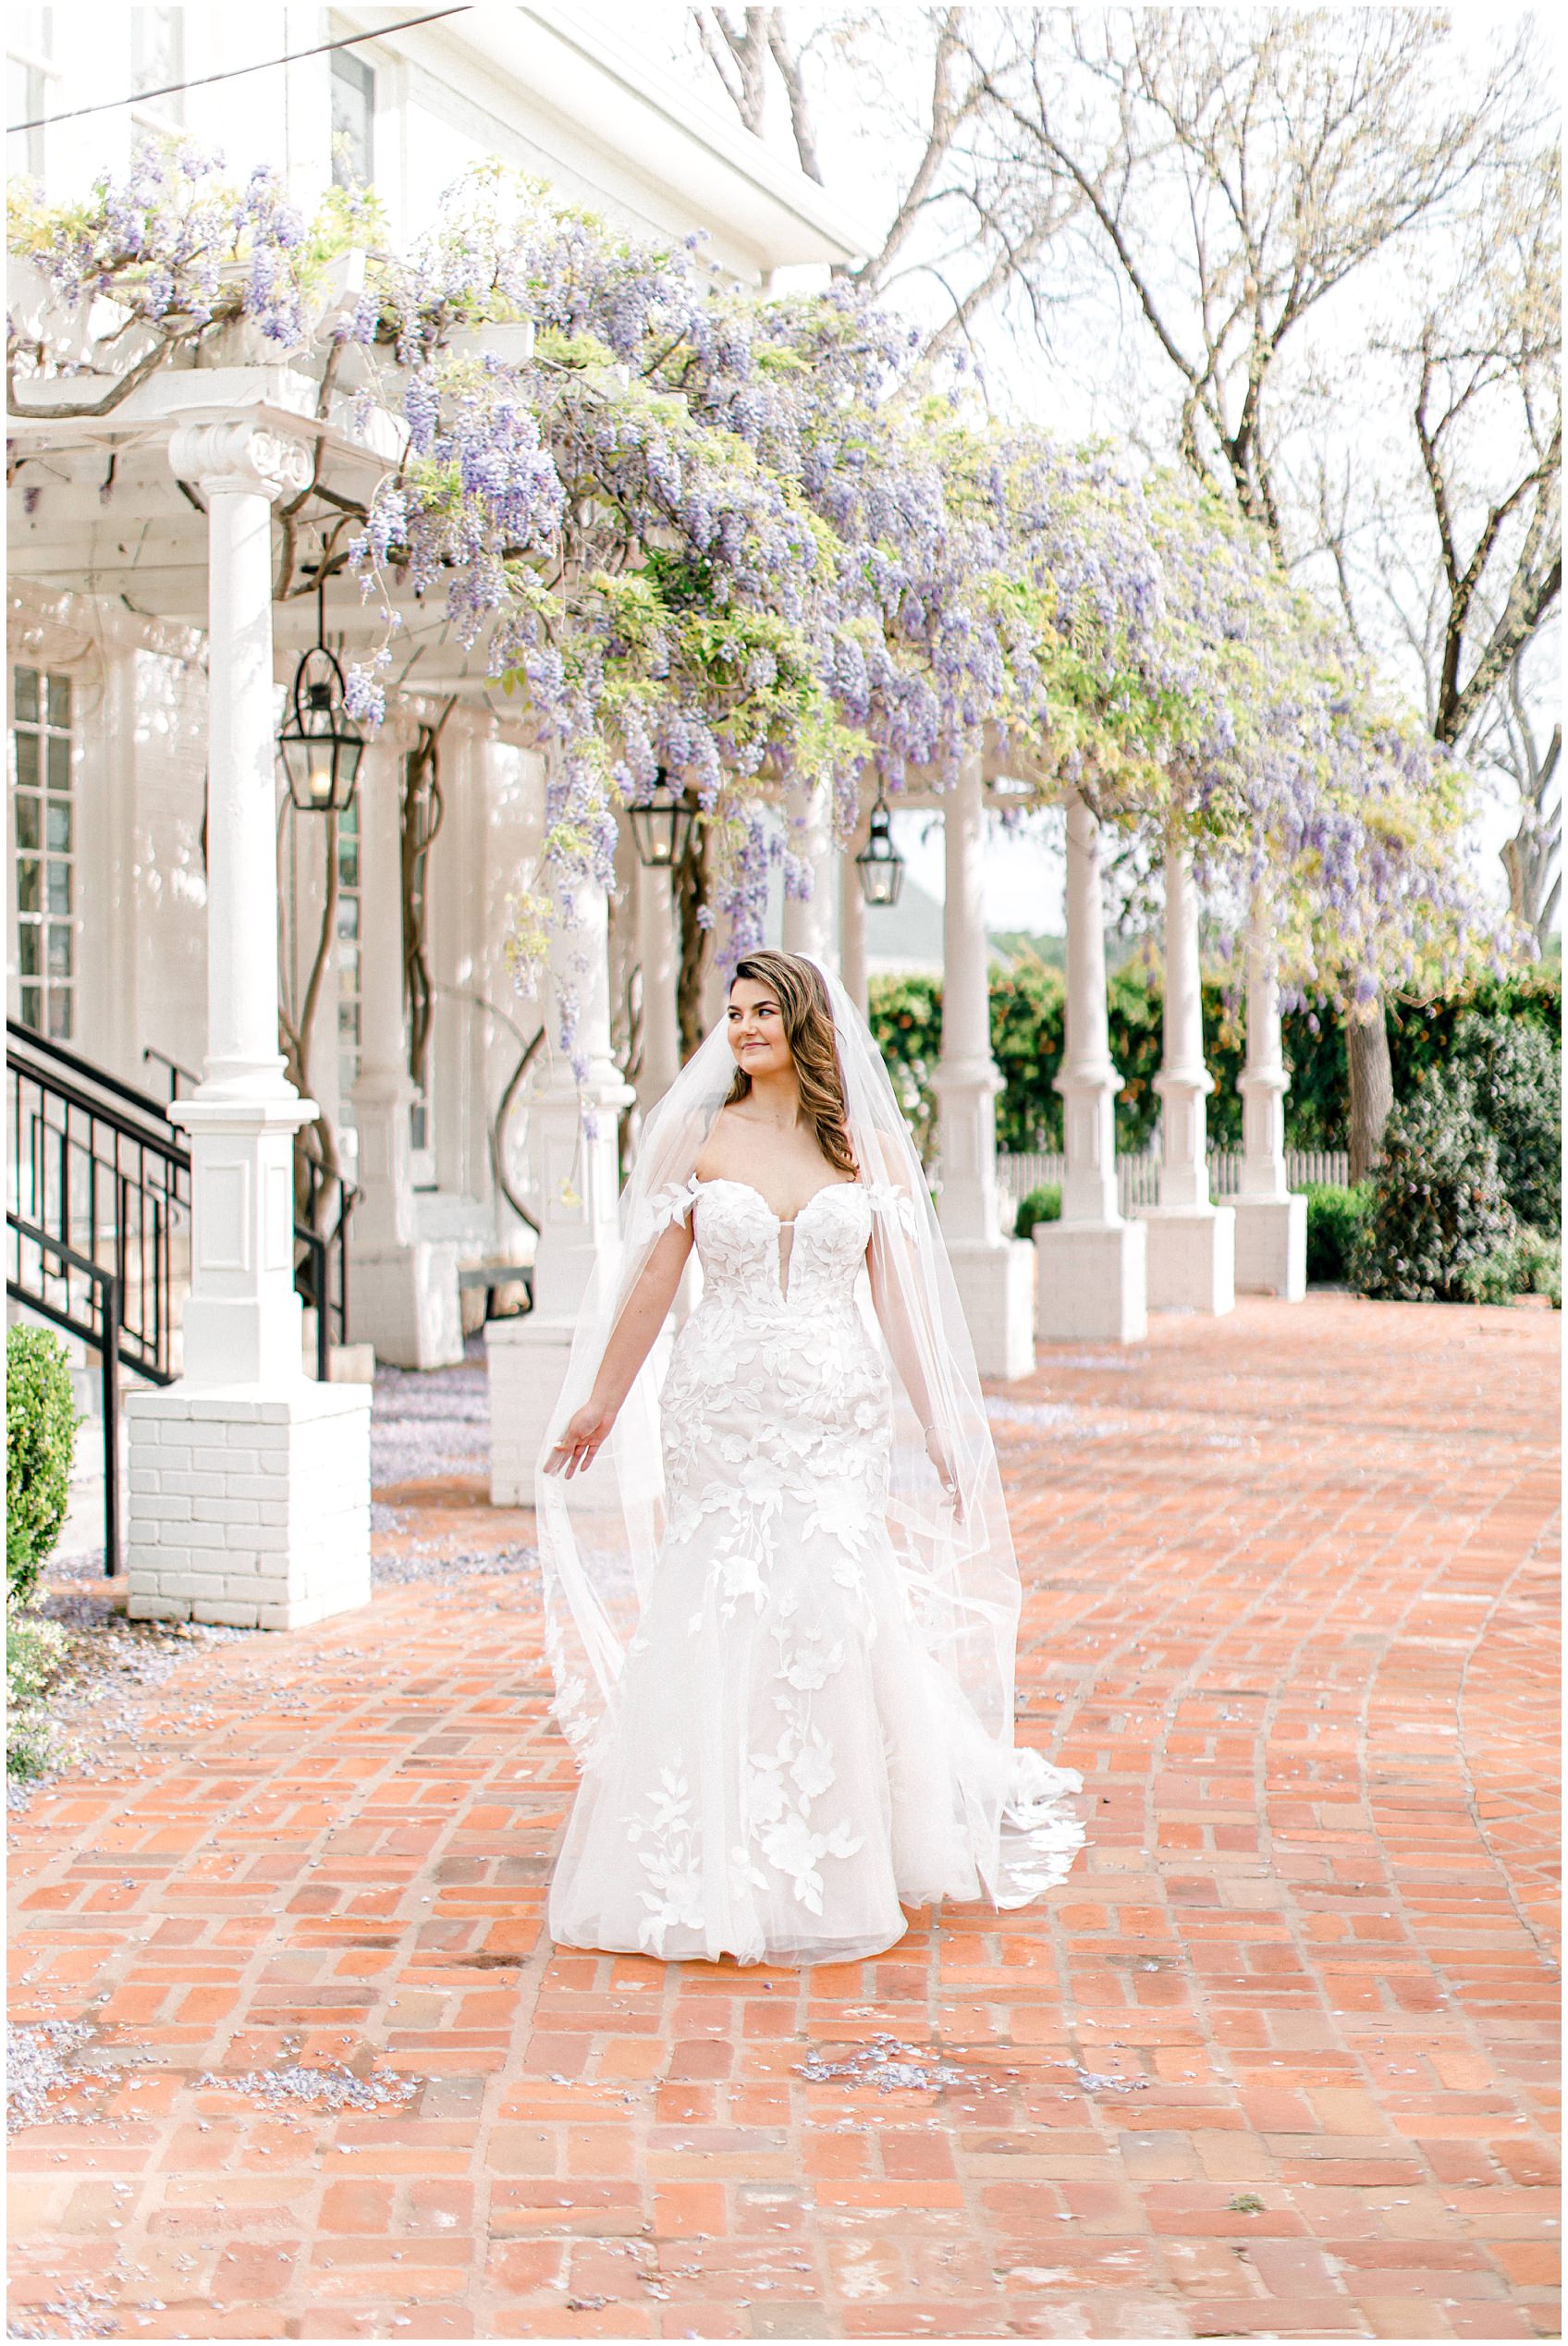 Woodbine Mansion Spring Bridal wedding Photos by Allison Jeffers Photography 0020